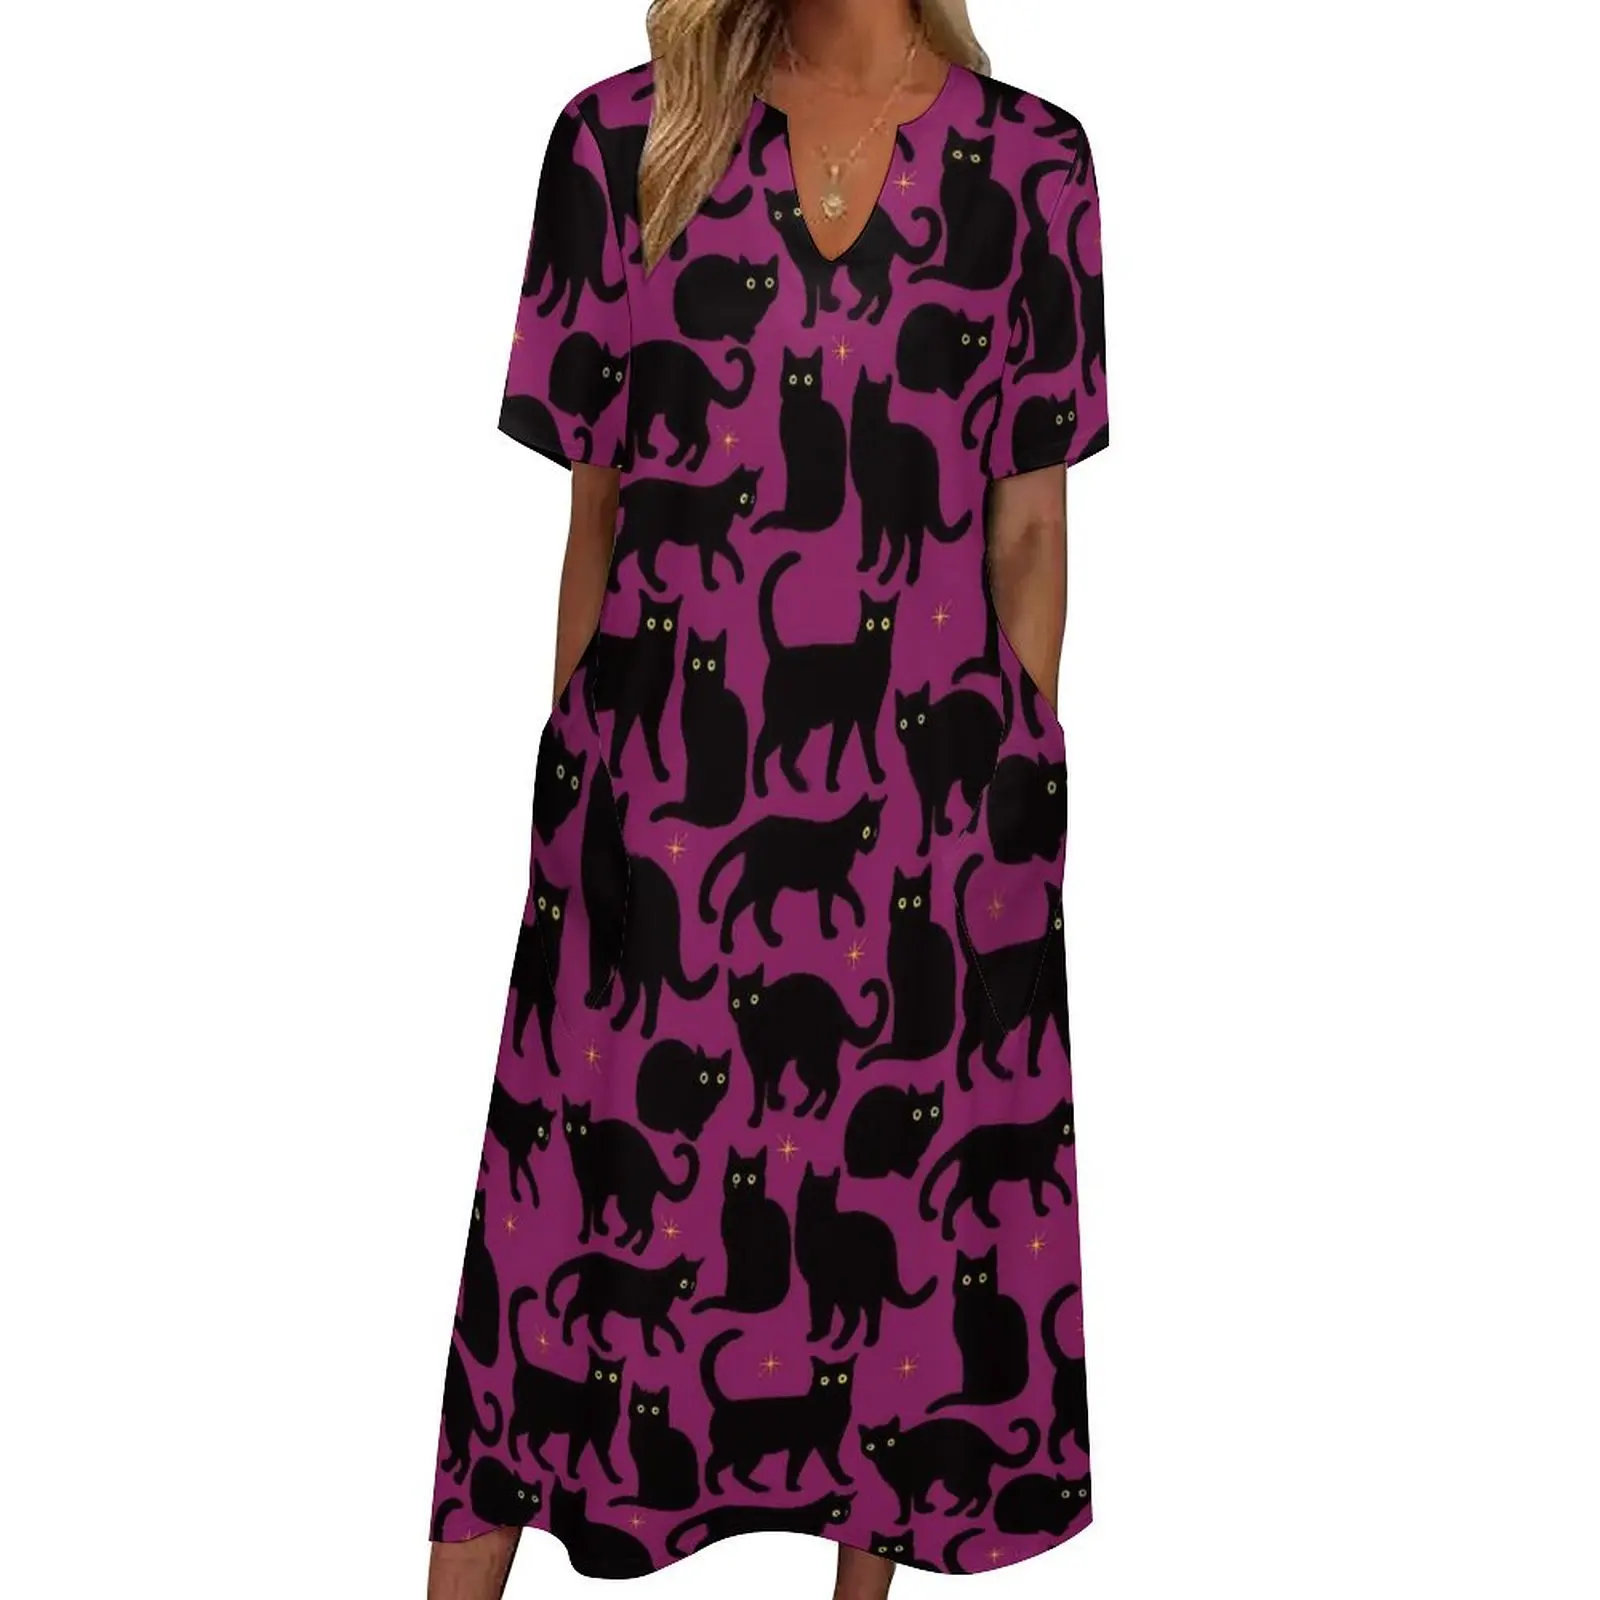 

Magic Cats Print Dress Black Animal Vintage Maxi Dress Short Sleeve Graphic Casual Long Dresses Aesthetic Oversized Clothes